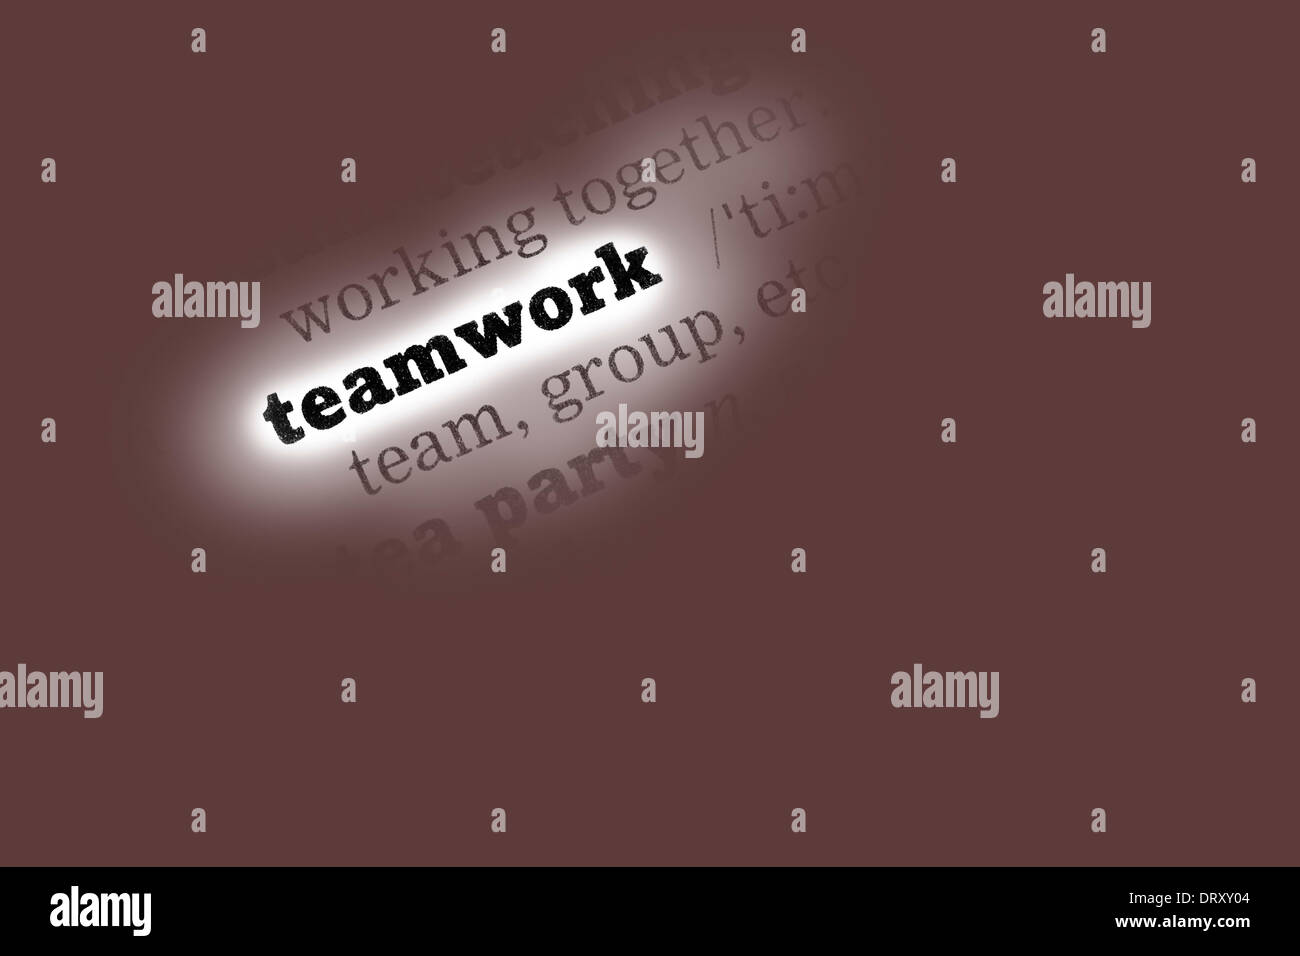 Teamwork Dictionary Definition closeup black and white Stock Photo